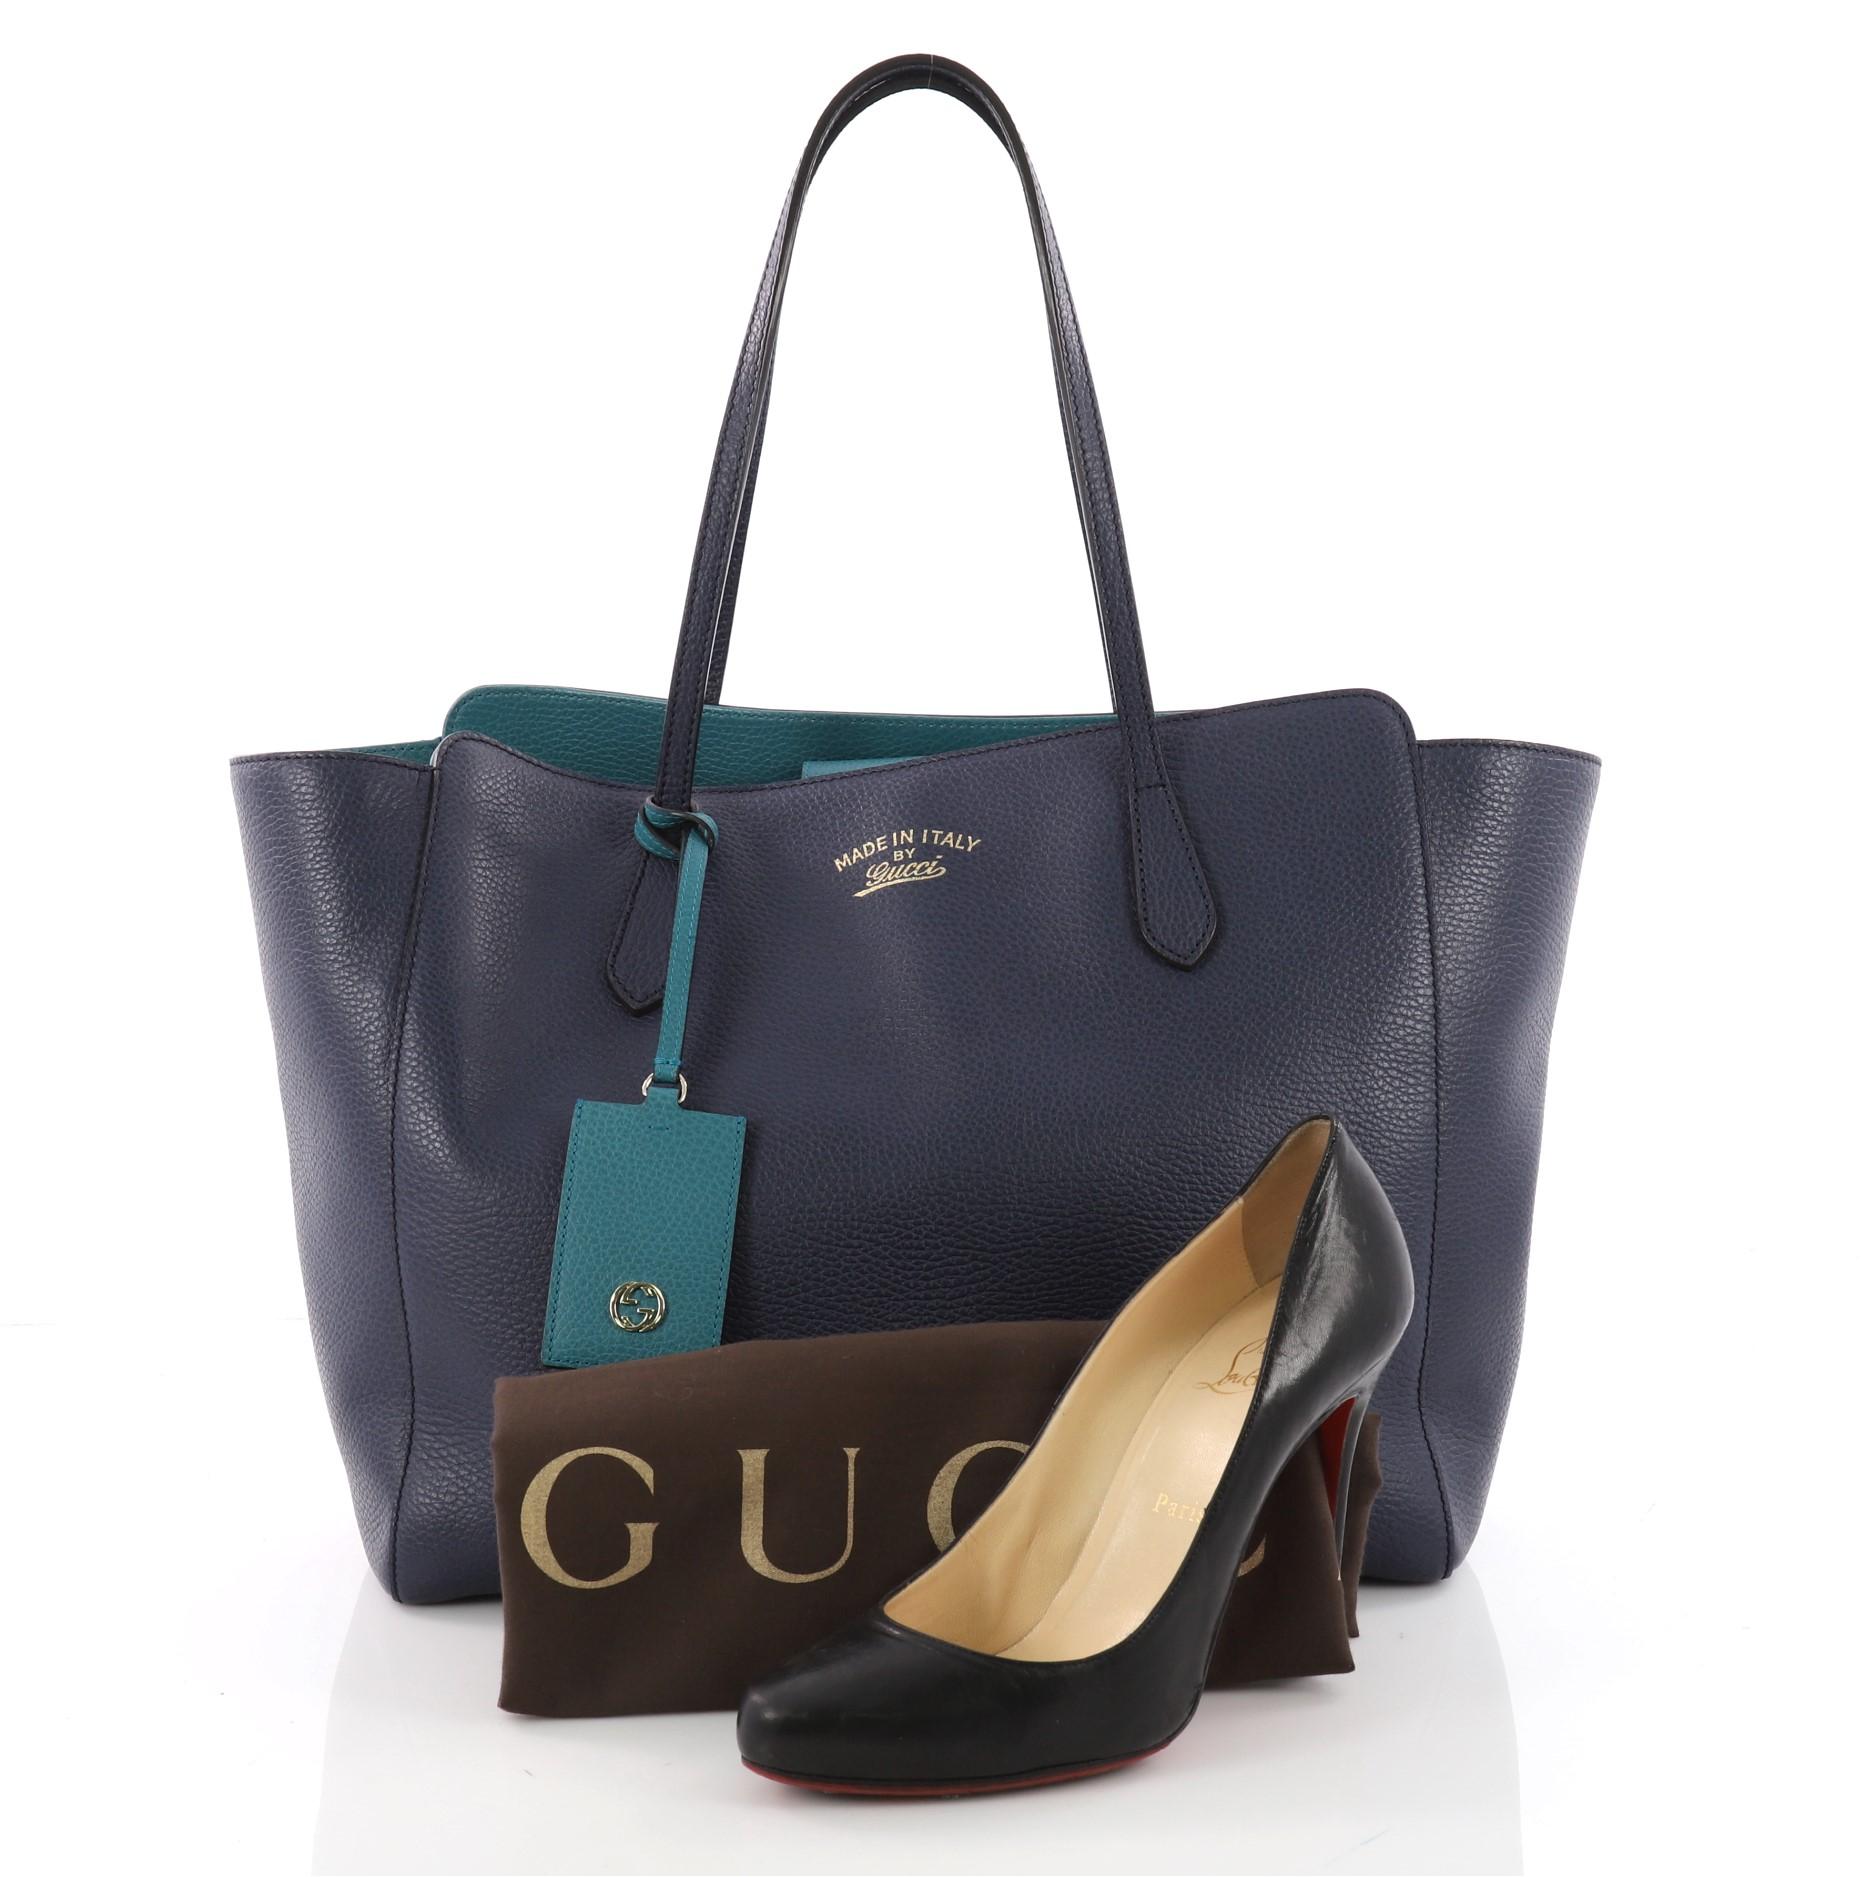 This authentic Gucci Swing Tote Leather Medium is modern and sophisticated in design. Crafted in blue leather, this elegant tote features tall dual-slim handles, Gucci stamped logo at the front, expanded wing silhouette, and gold-tone hardware